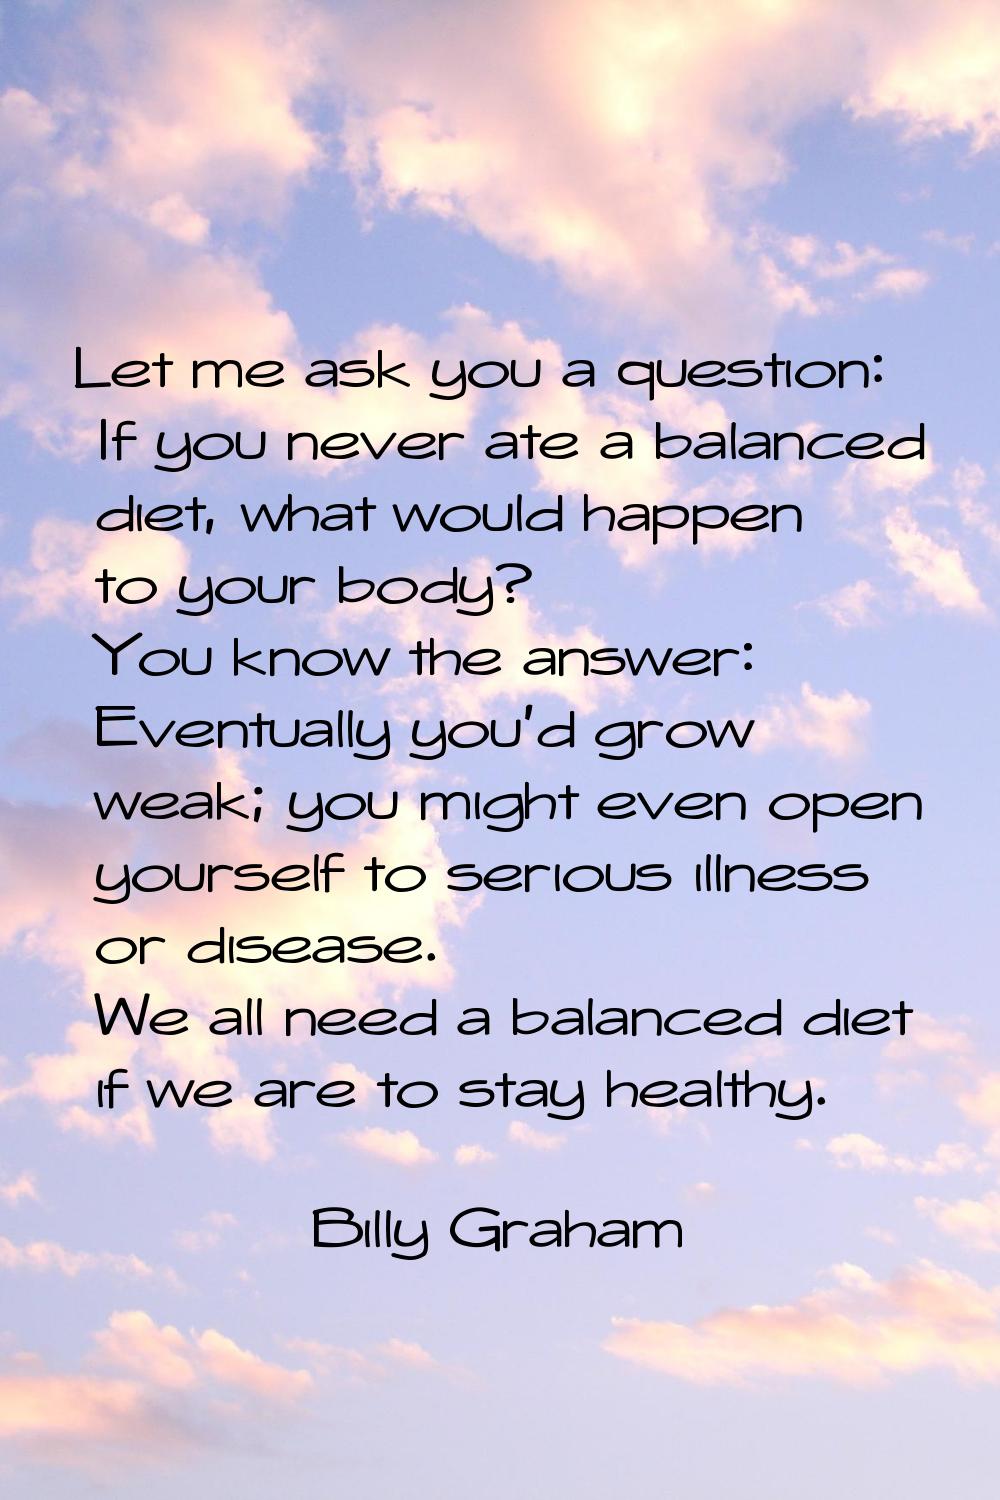 Let me ask you a question: If you never ate a balanced diet, what would happen to your body? You kn